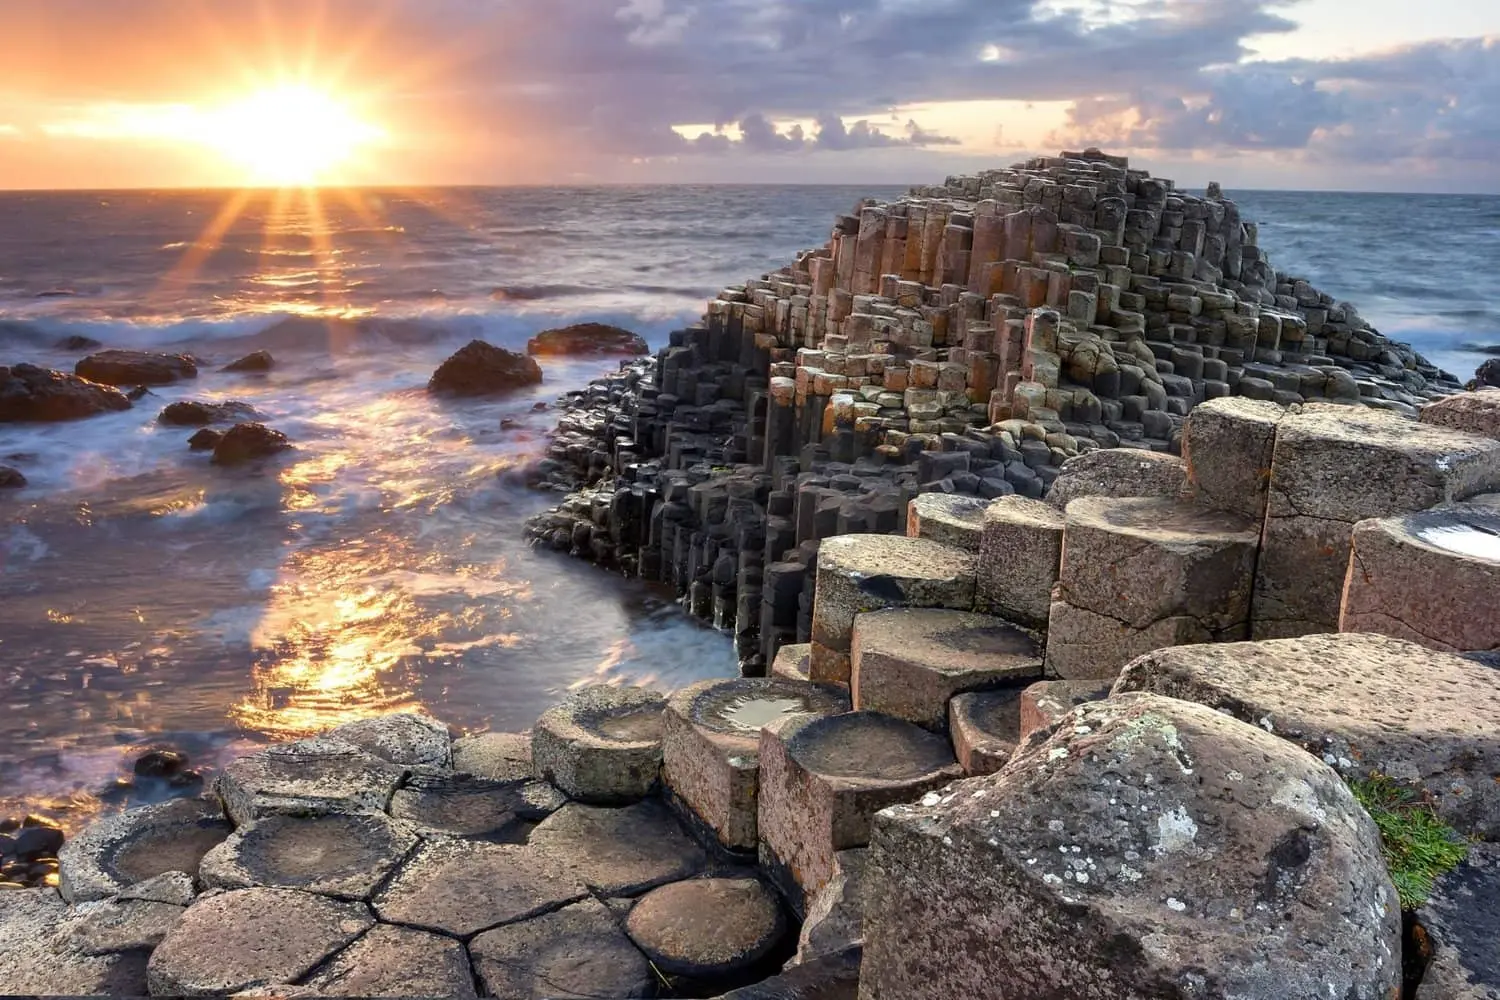 The Giants Causeway at sunrise looking out over the basalt columns towards the sea